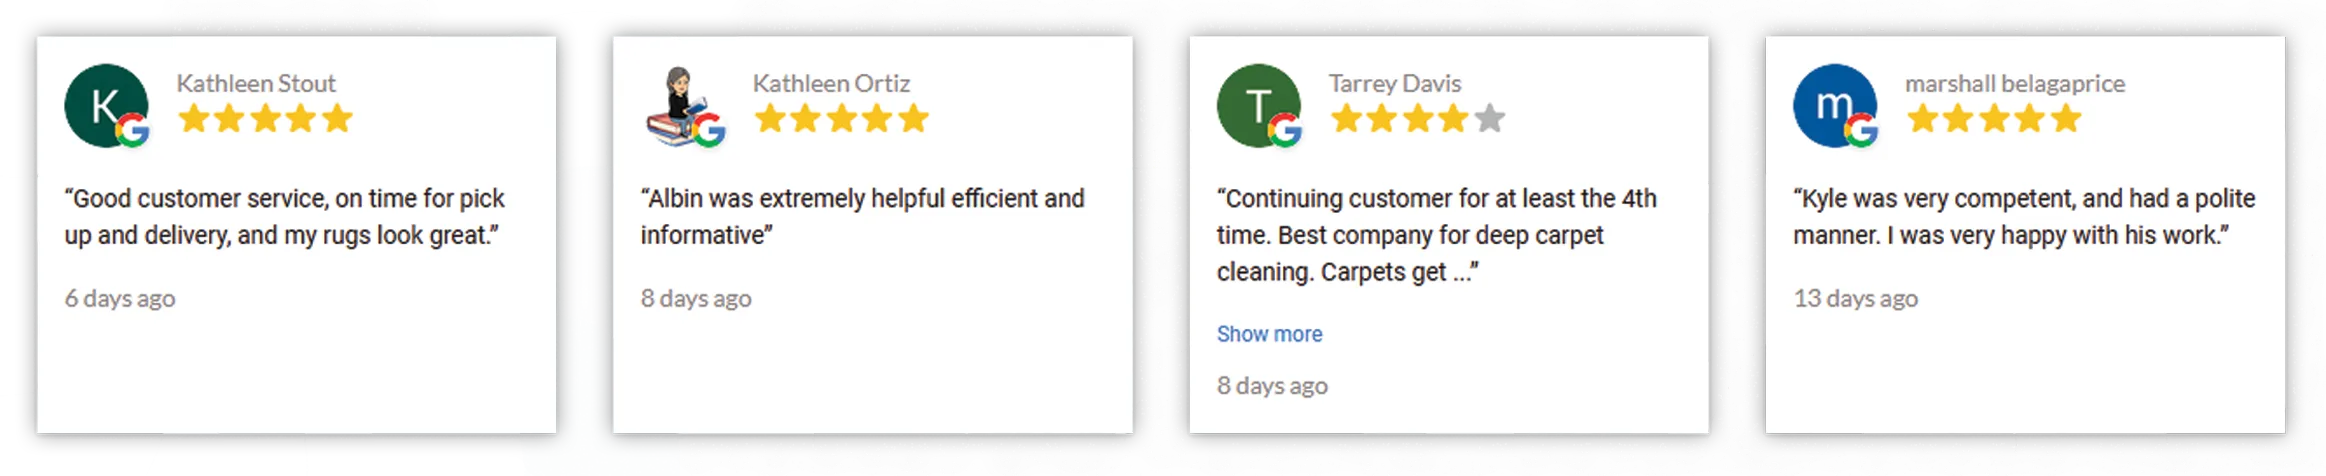 online reviews as displayed on a website